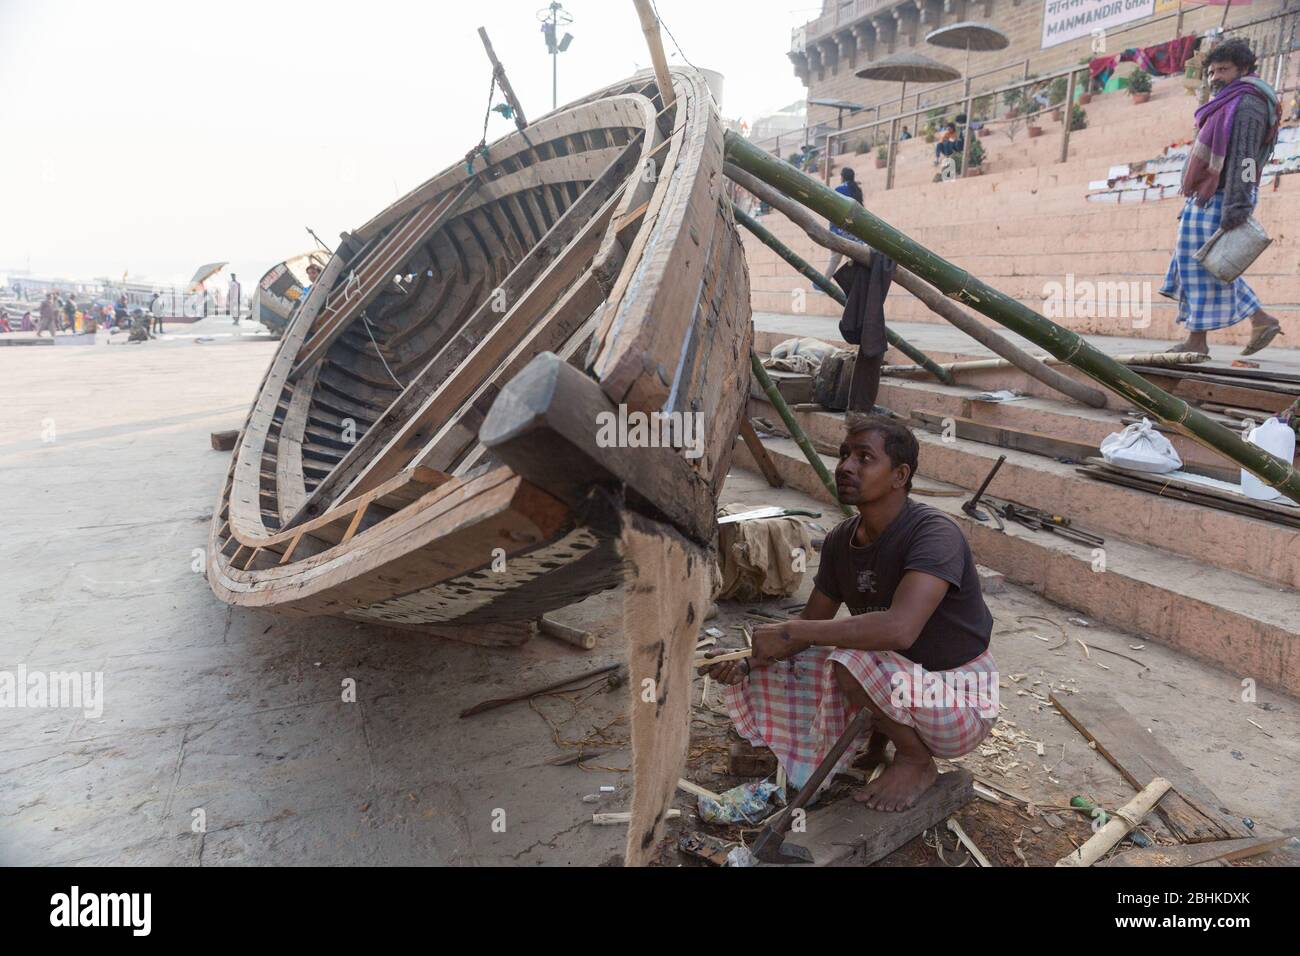 A shipwright builds a boat for a living near Ganges river bank in Varanasi, India Stock Photo